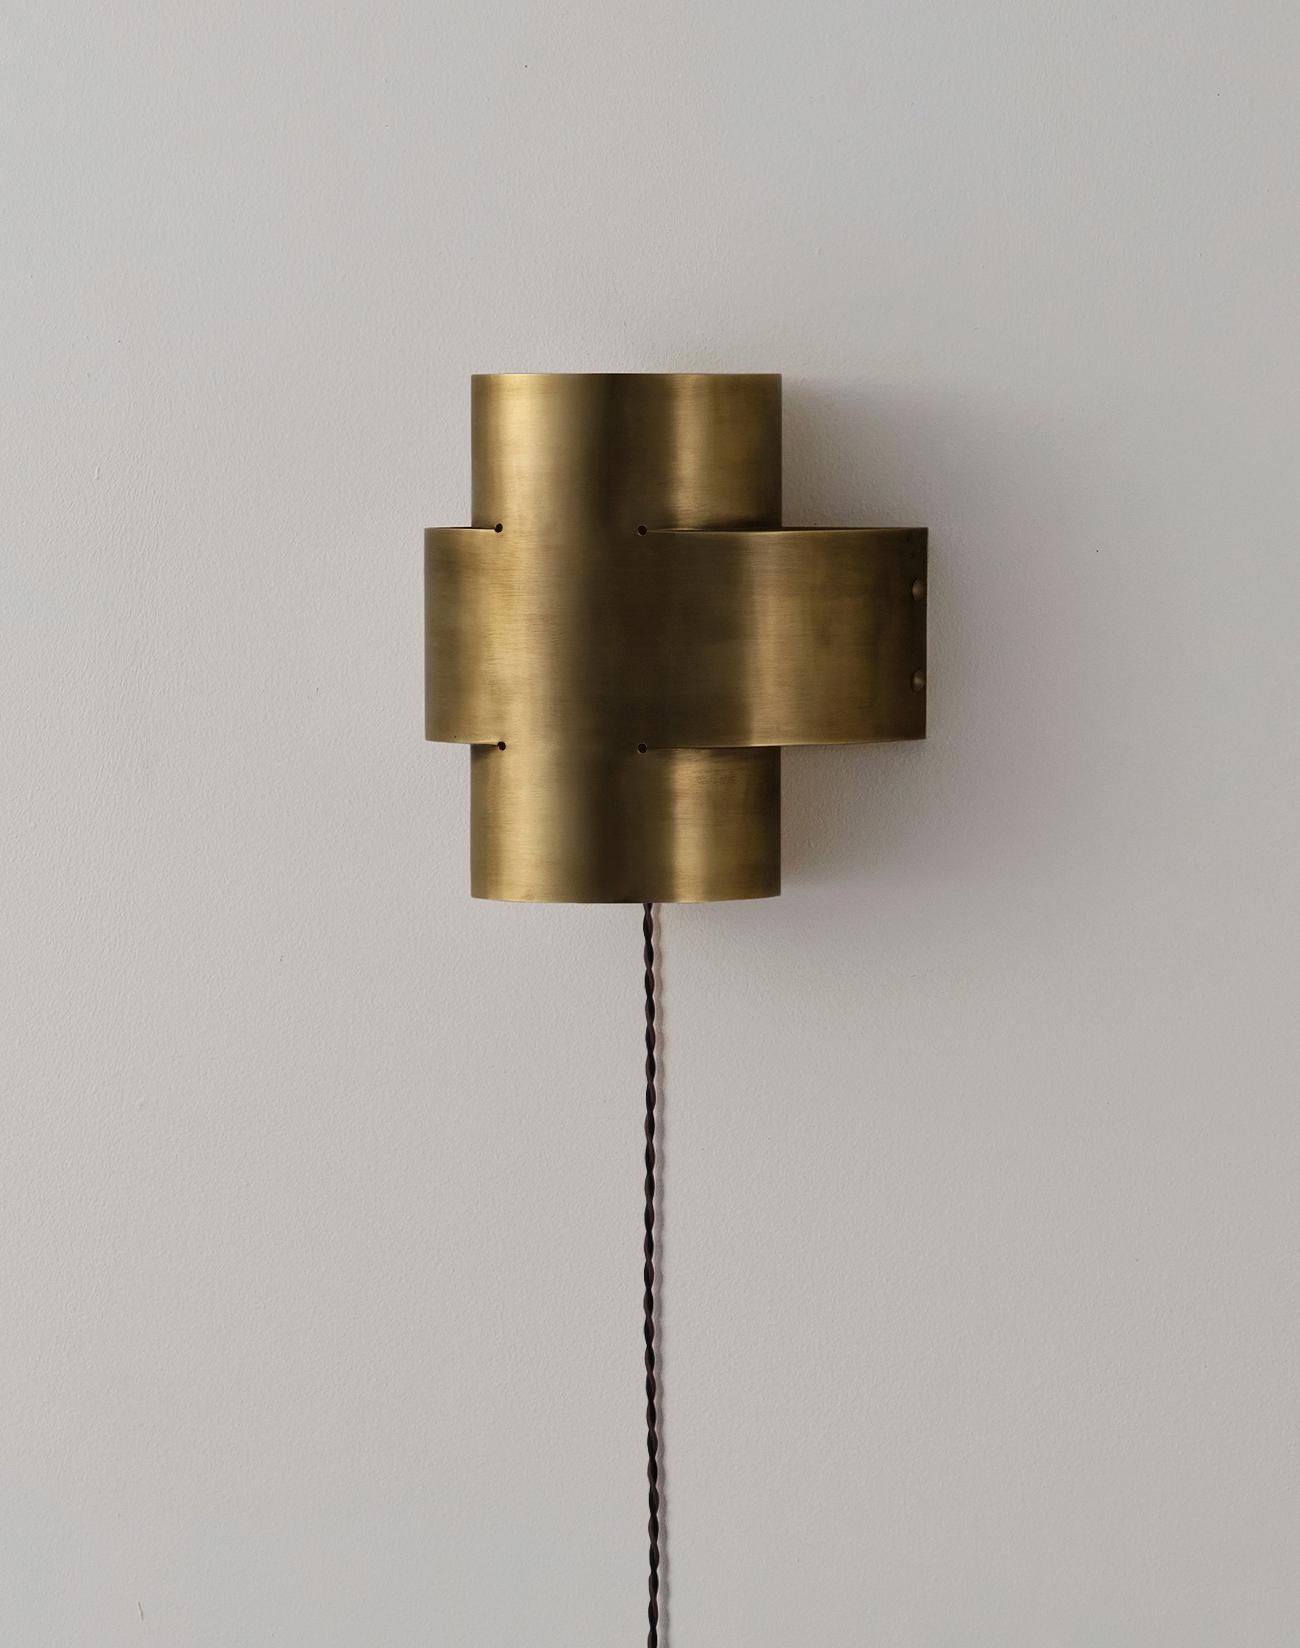 Aged brass plus one large lamp by Paul Matter.
Dimensions: L: 240 mm, H: 254 mm, D: 155 mm
1 Type E27 Base, 3W - 5W LED.
Warm White, Voltage 220-240V.
CE Certified
Dimmable upon request
Materials: Brass

Finished in burnt, aged, buffed brass